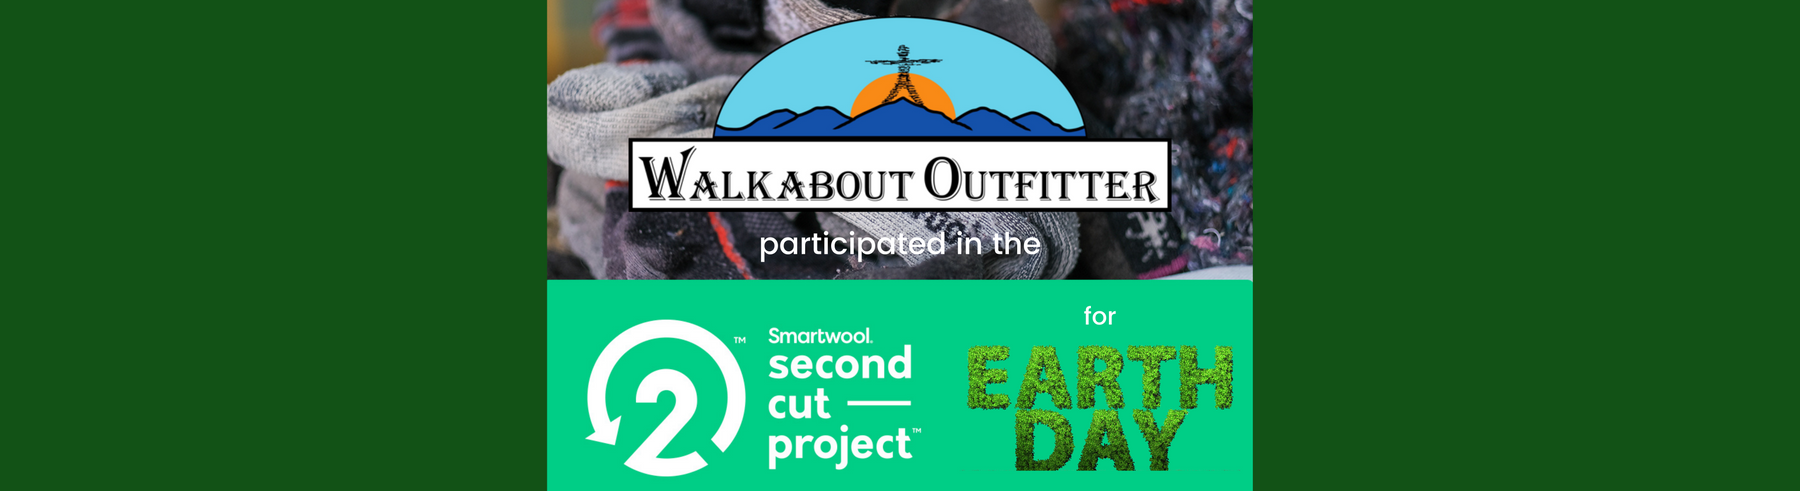 Walkabout Collects 148 lbs. of Socks for Smartwool Second Cut Project